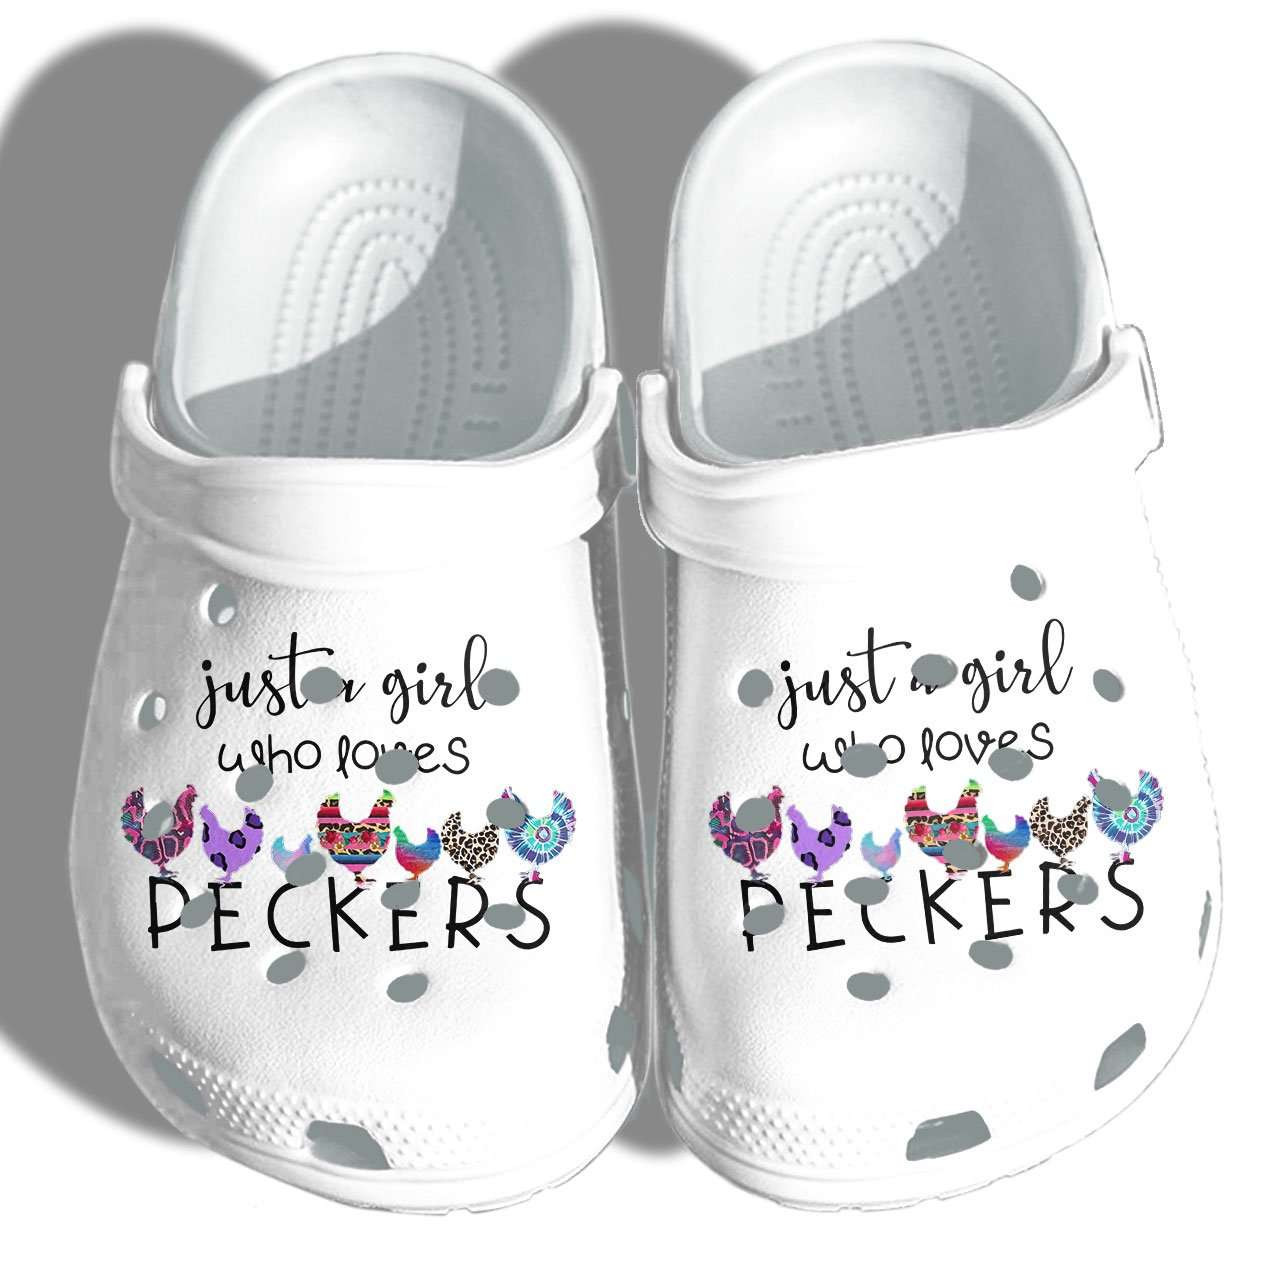 Just A Girl Who Loves Peckers Chicken Crocs Crocband Clog Shoes